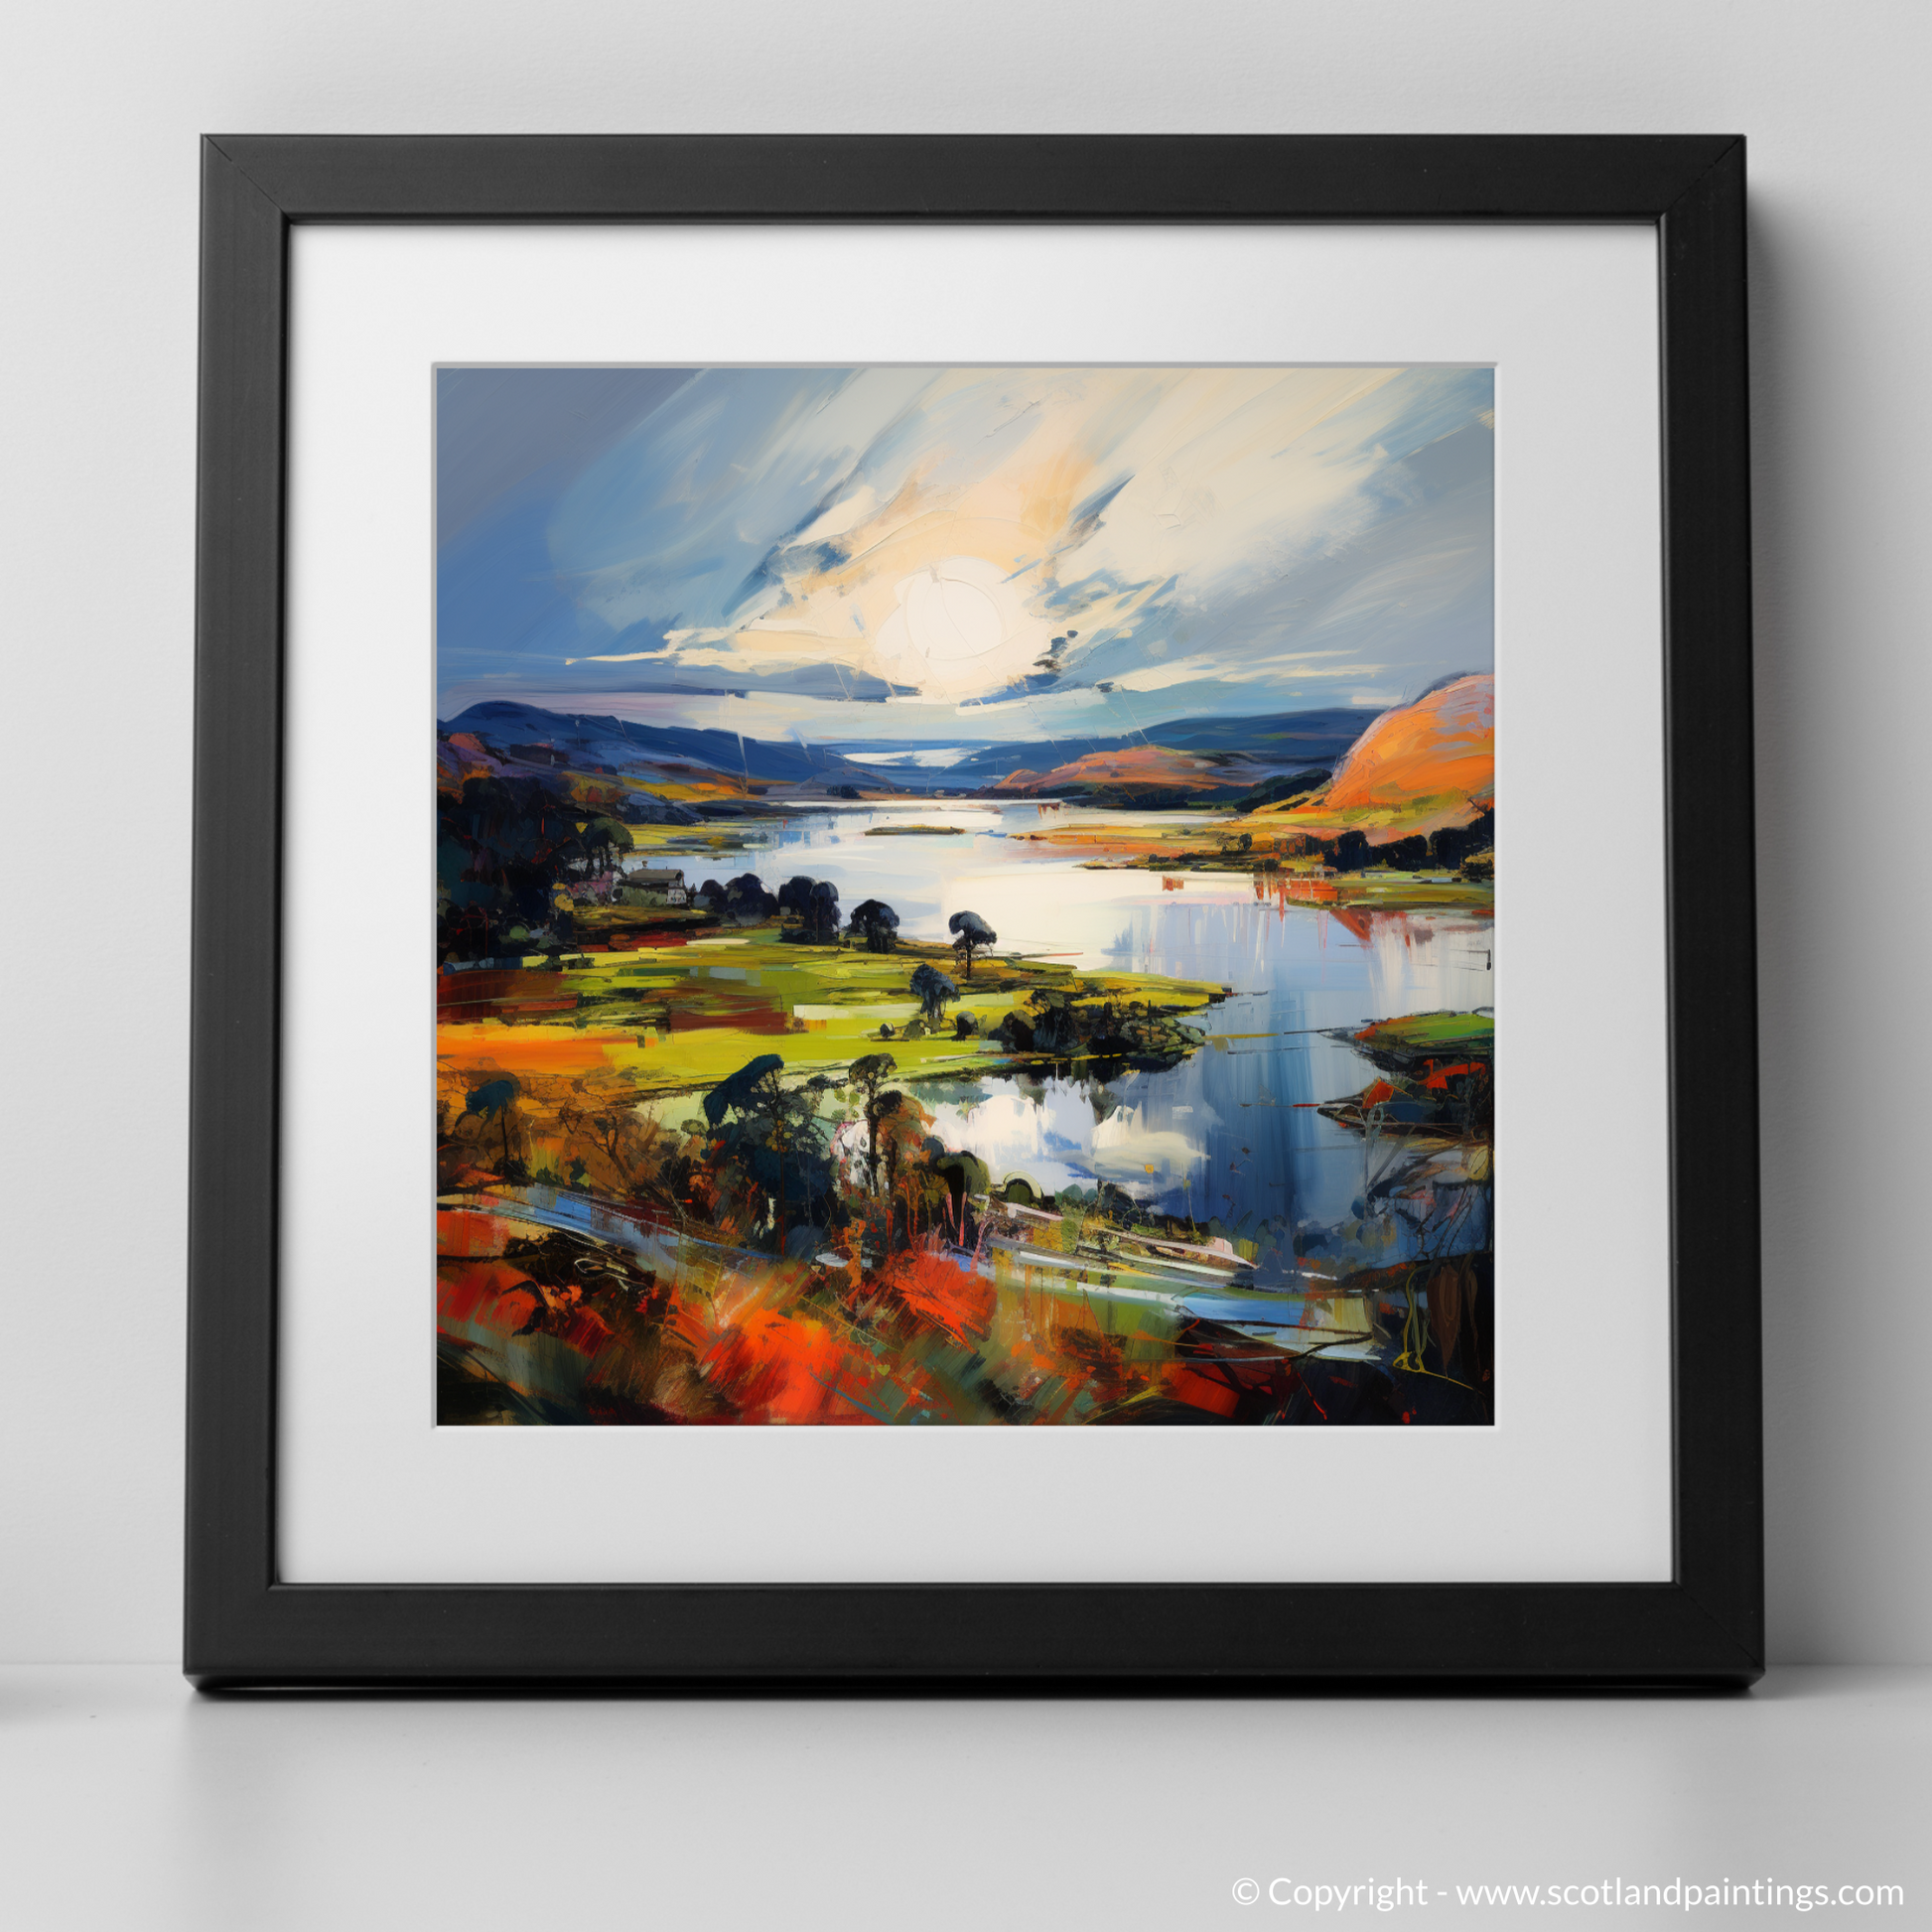 Art Print of Loch Leven, Perth and Kinross with a black frame